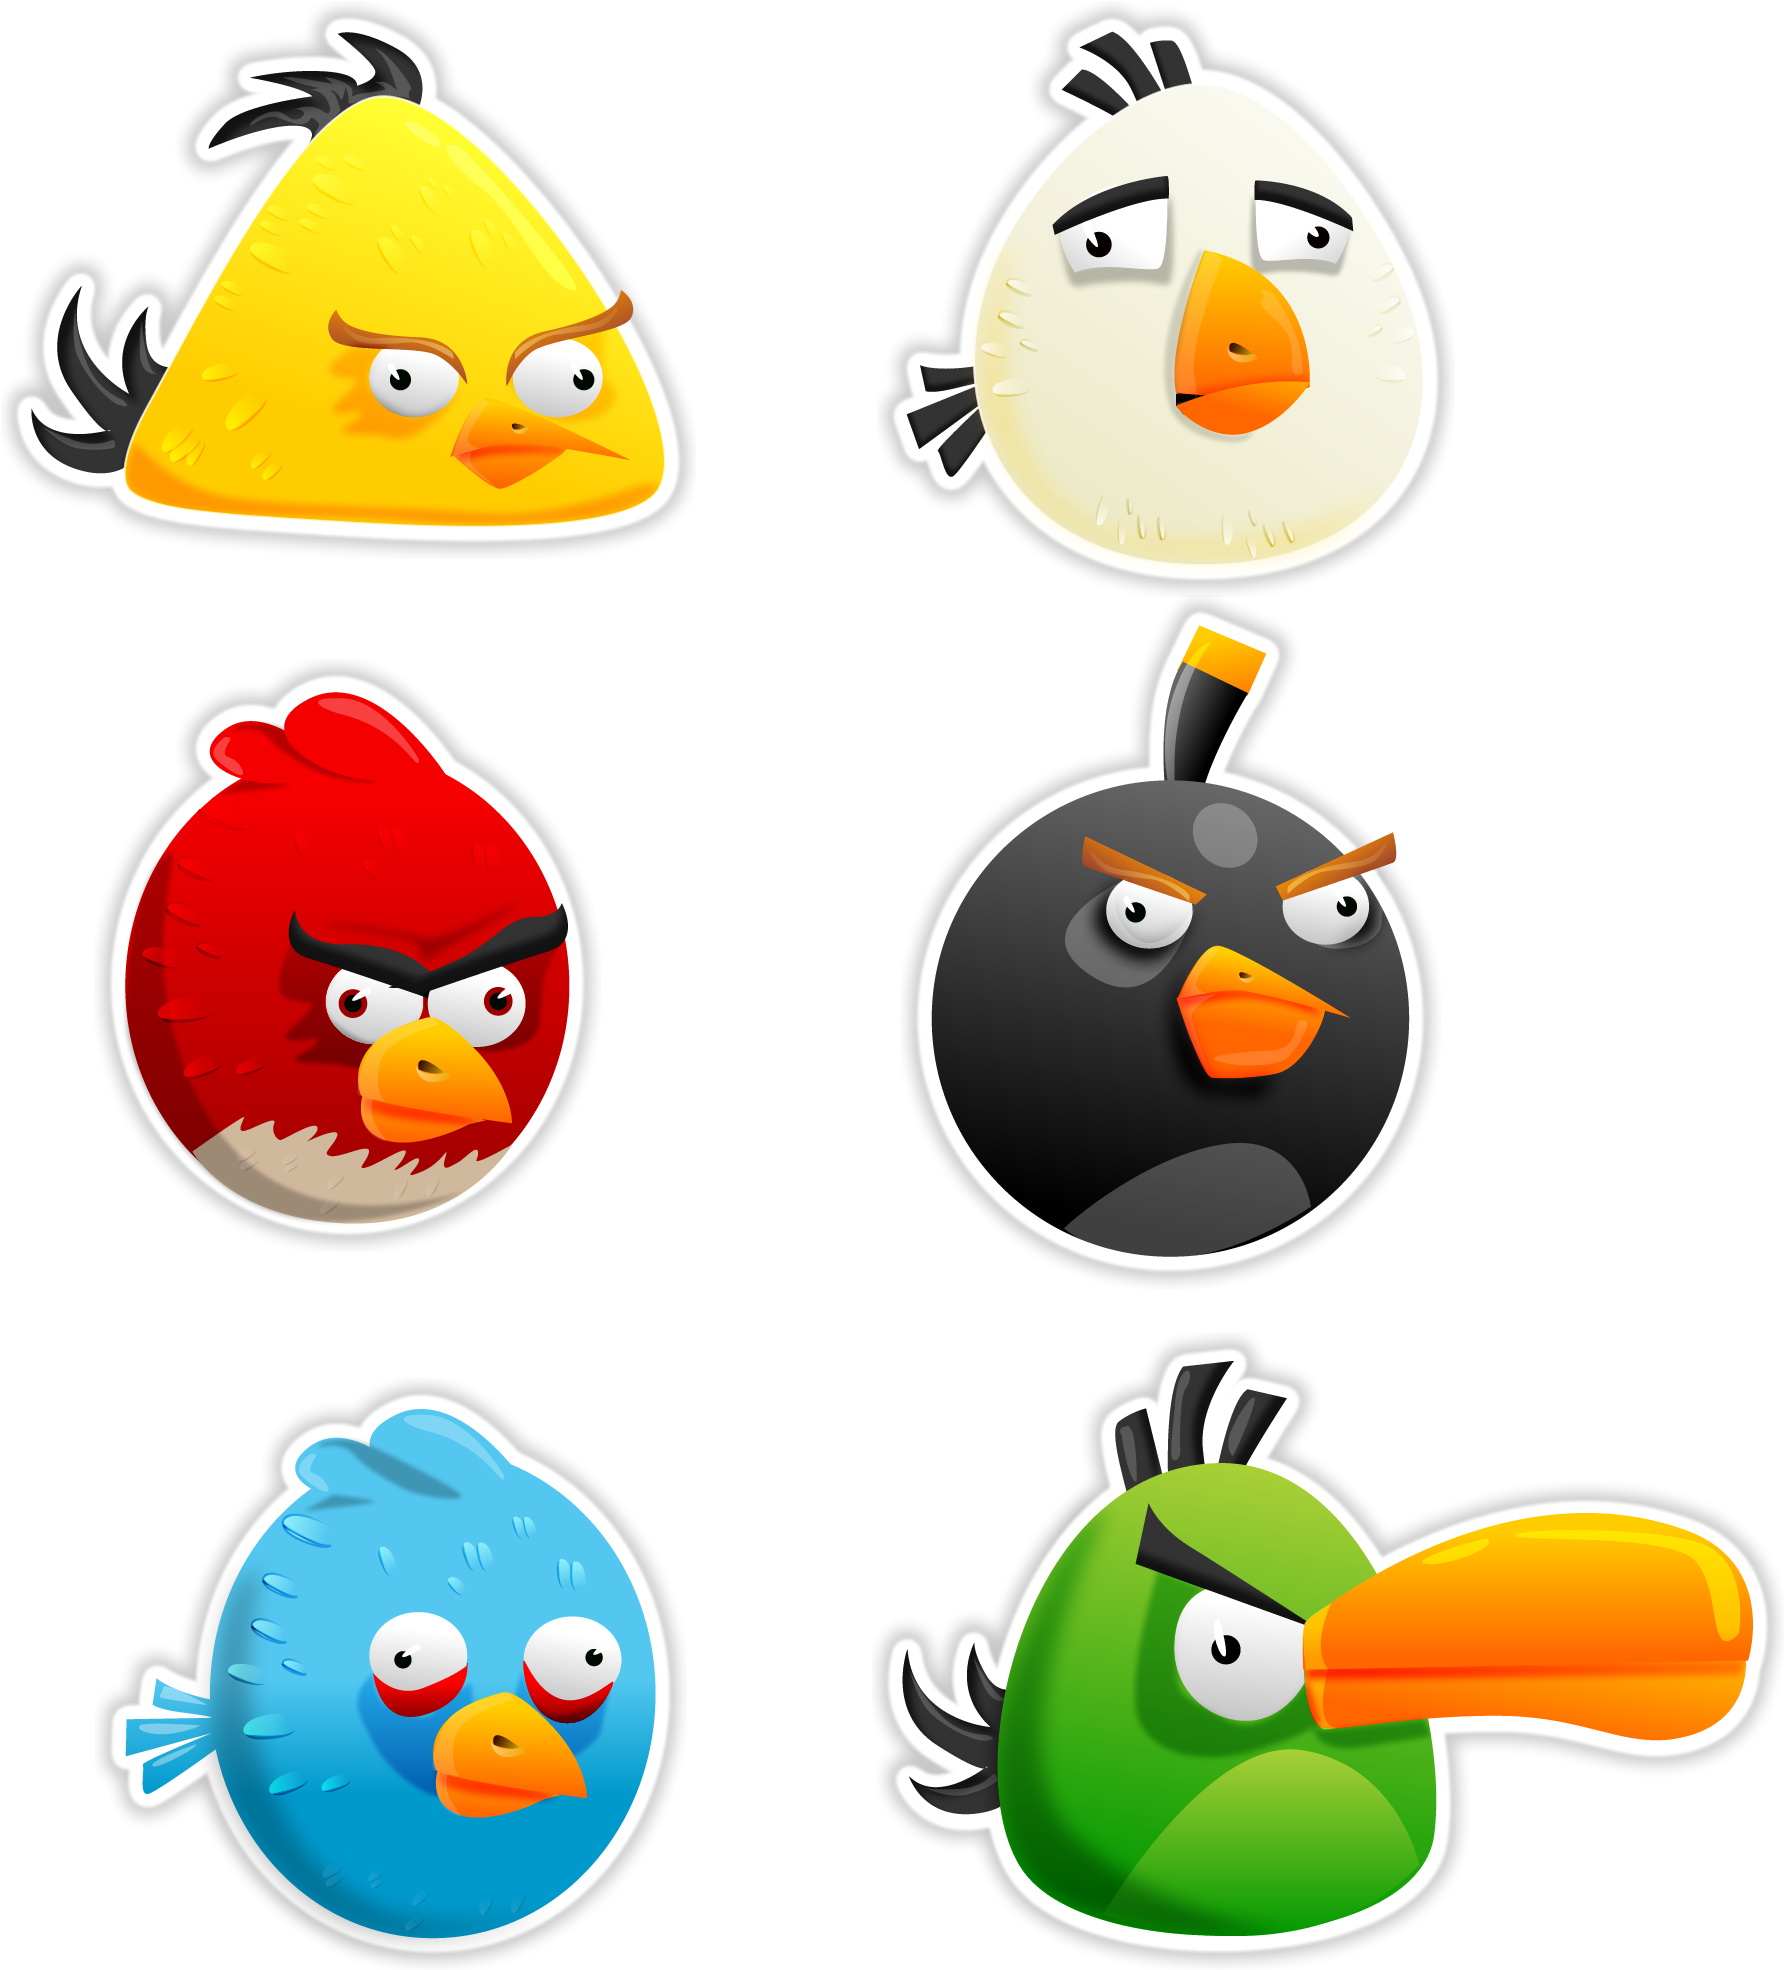 Angry Birds - Angry Bird Picture Download (1963x2100)